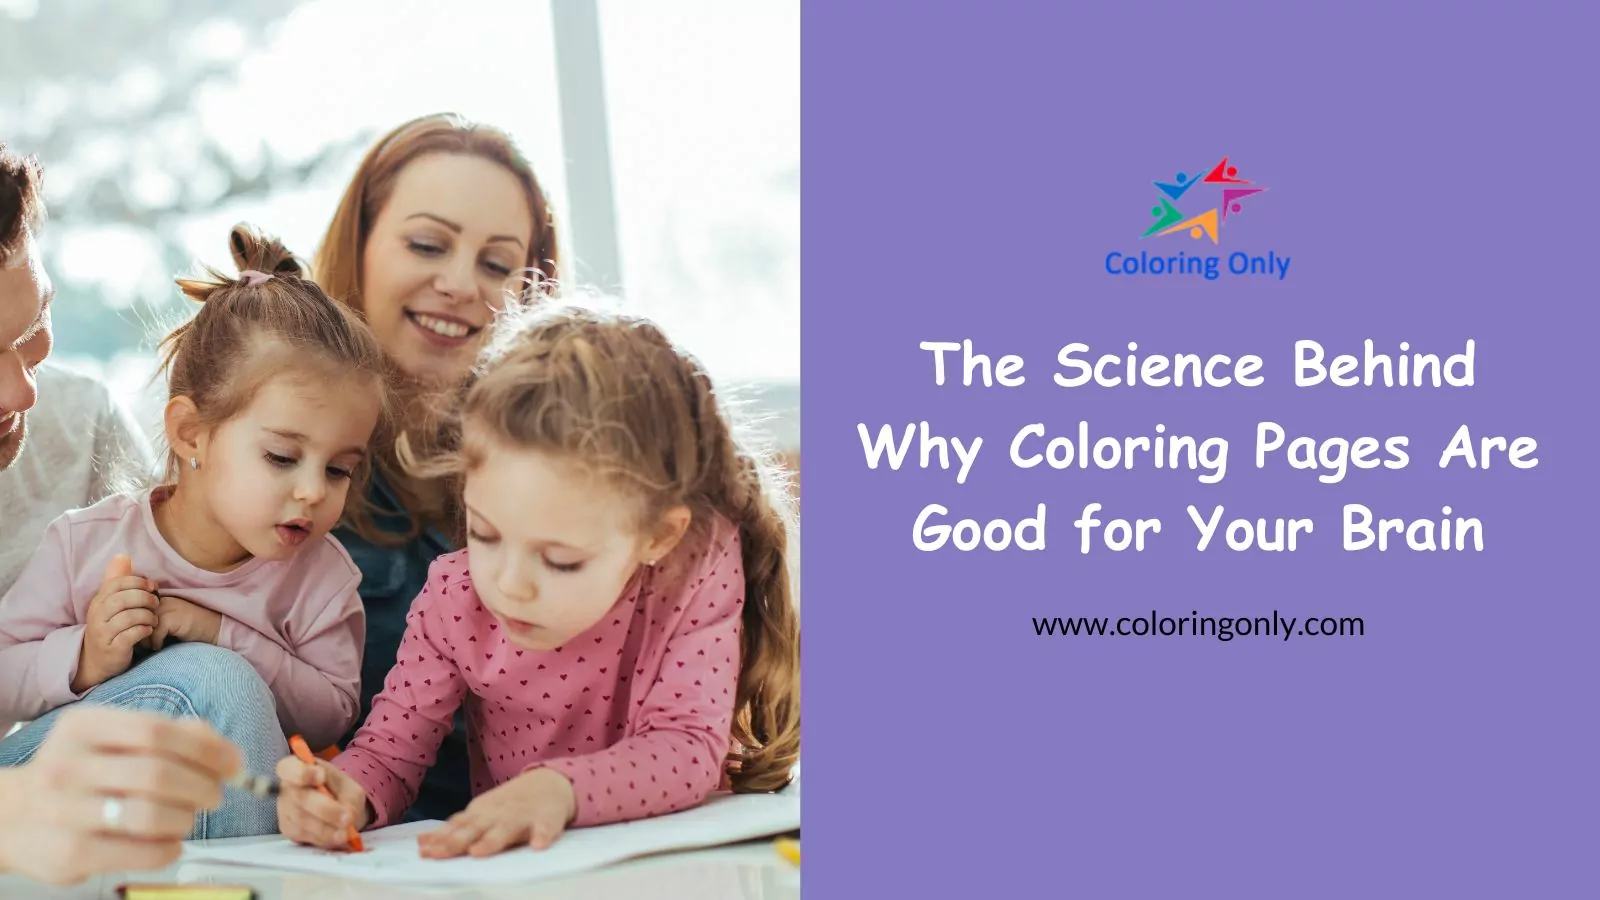 The Science Behind Why Coloring Pages Are Good for Your Brain